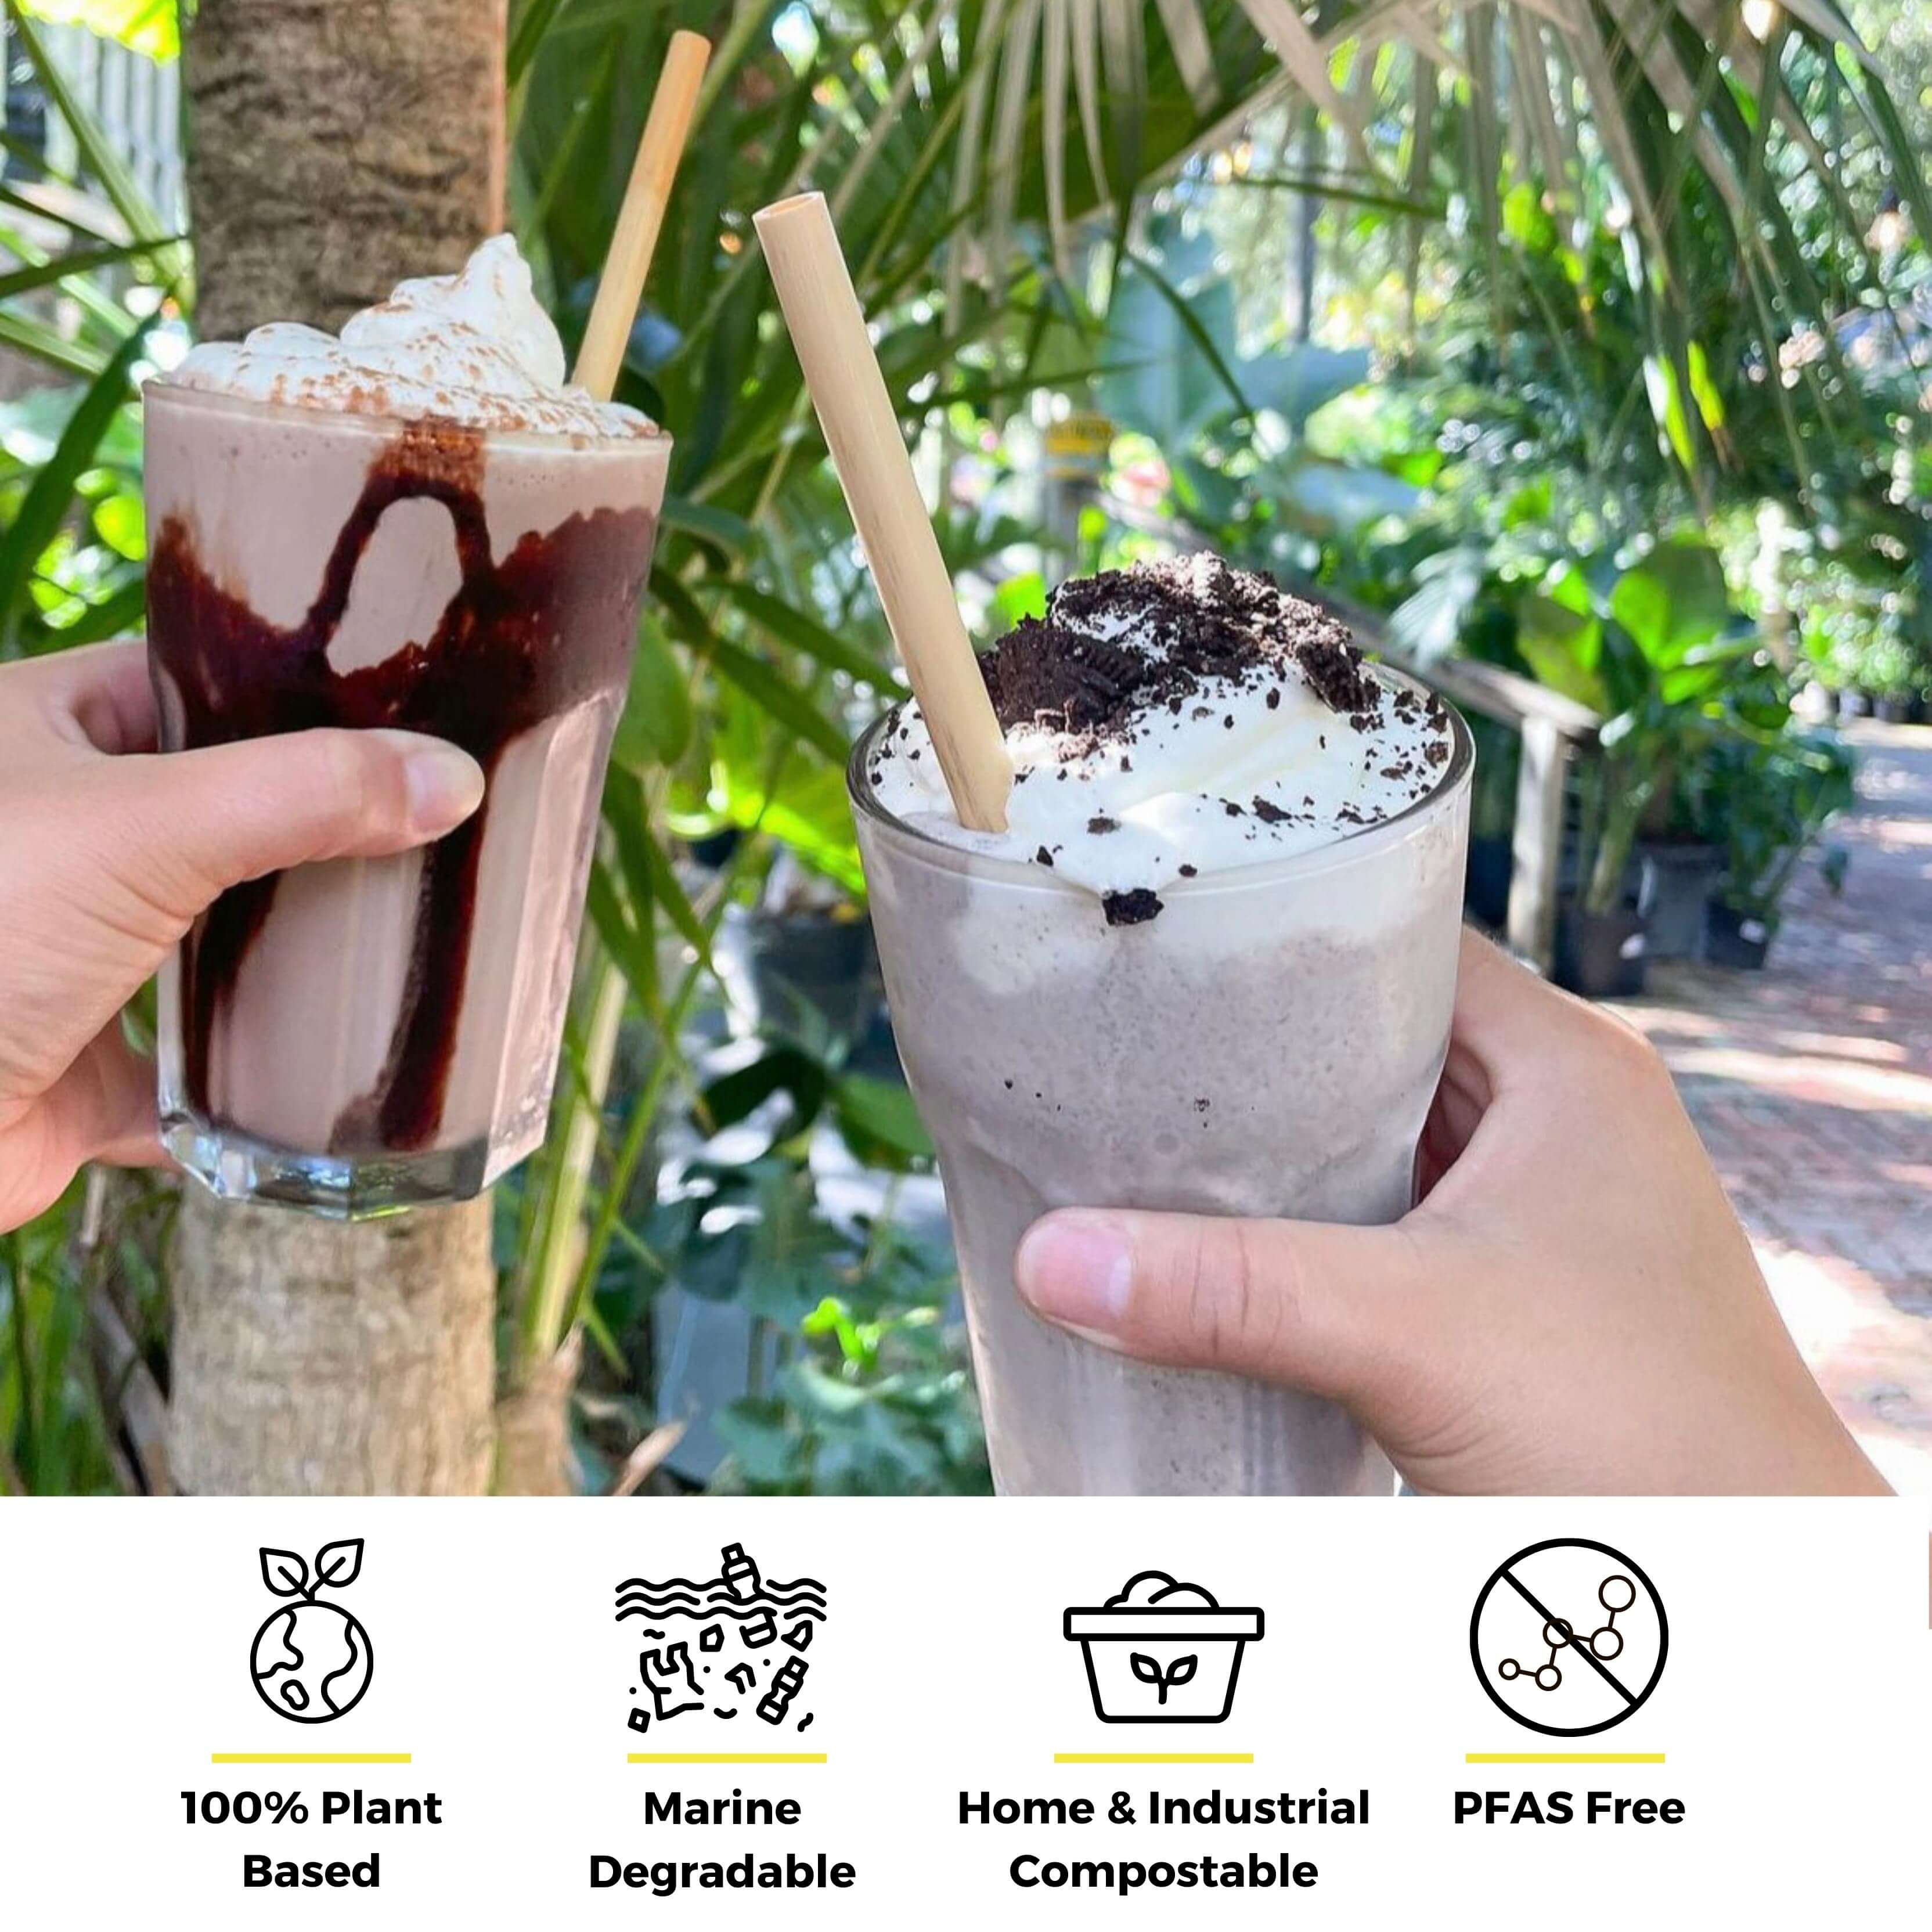 Two hands are holding iced frappuccino drinks in clear glasses, one decorated with chocolate drizzle and whipped cream, and the other topped with whipped cream and cookie crumbles. Each drink features a biodegradable straw made from reed stems. The background is lush greenery, suggesting an outdoor setting. Below the image, four icons emphasize the eco-friendly nature of the straws, describing them as 100% plant-based, marine degradable, home and industrial compostable, and PFAS-free.